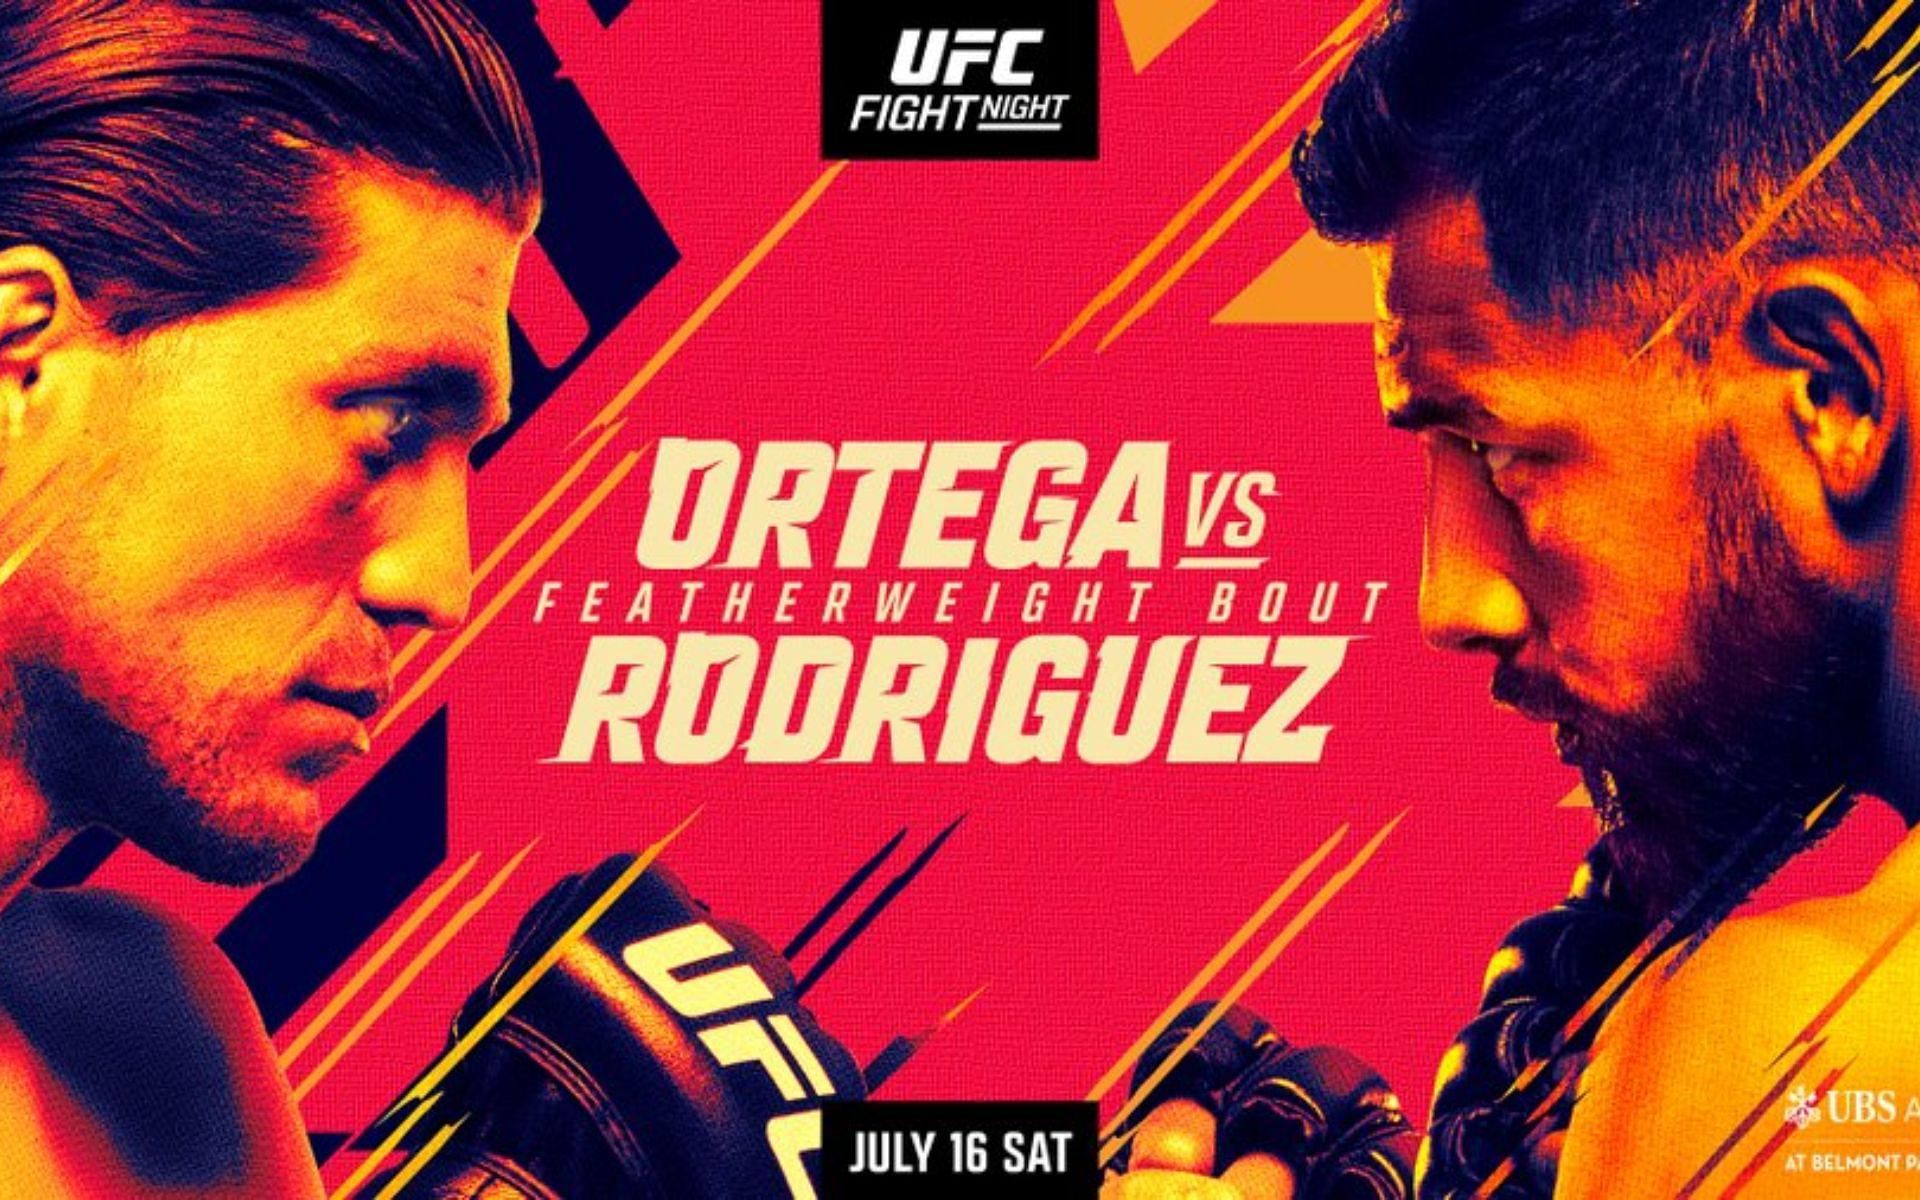 Brian Ortega faces Yair Rodriguez in a major featherweight battle this weekend